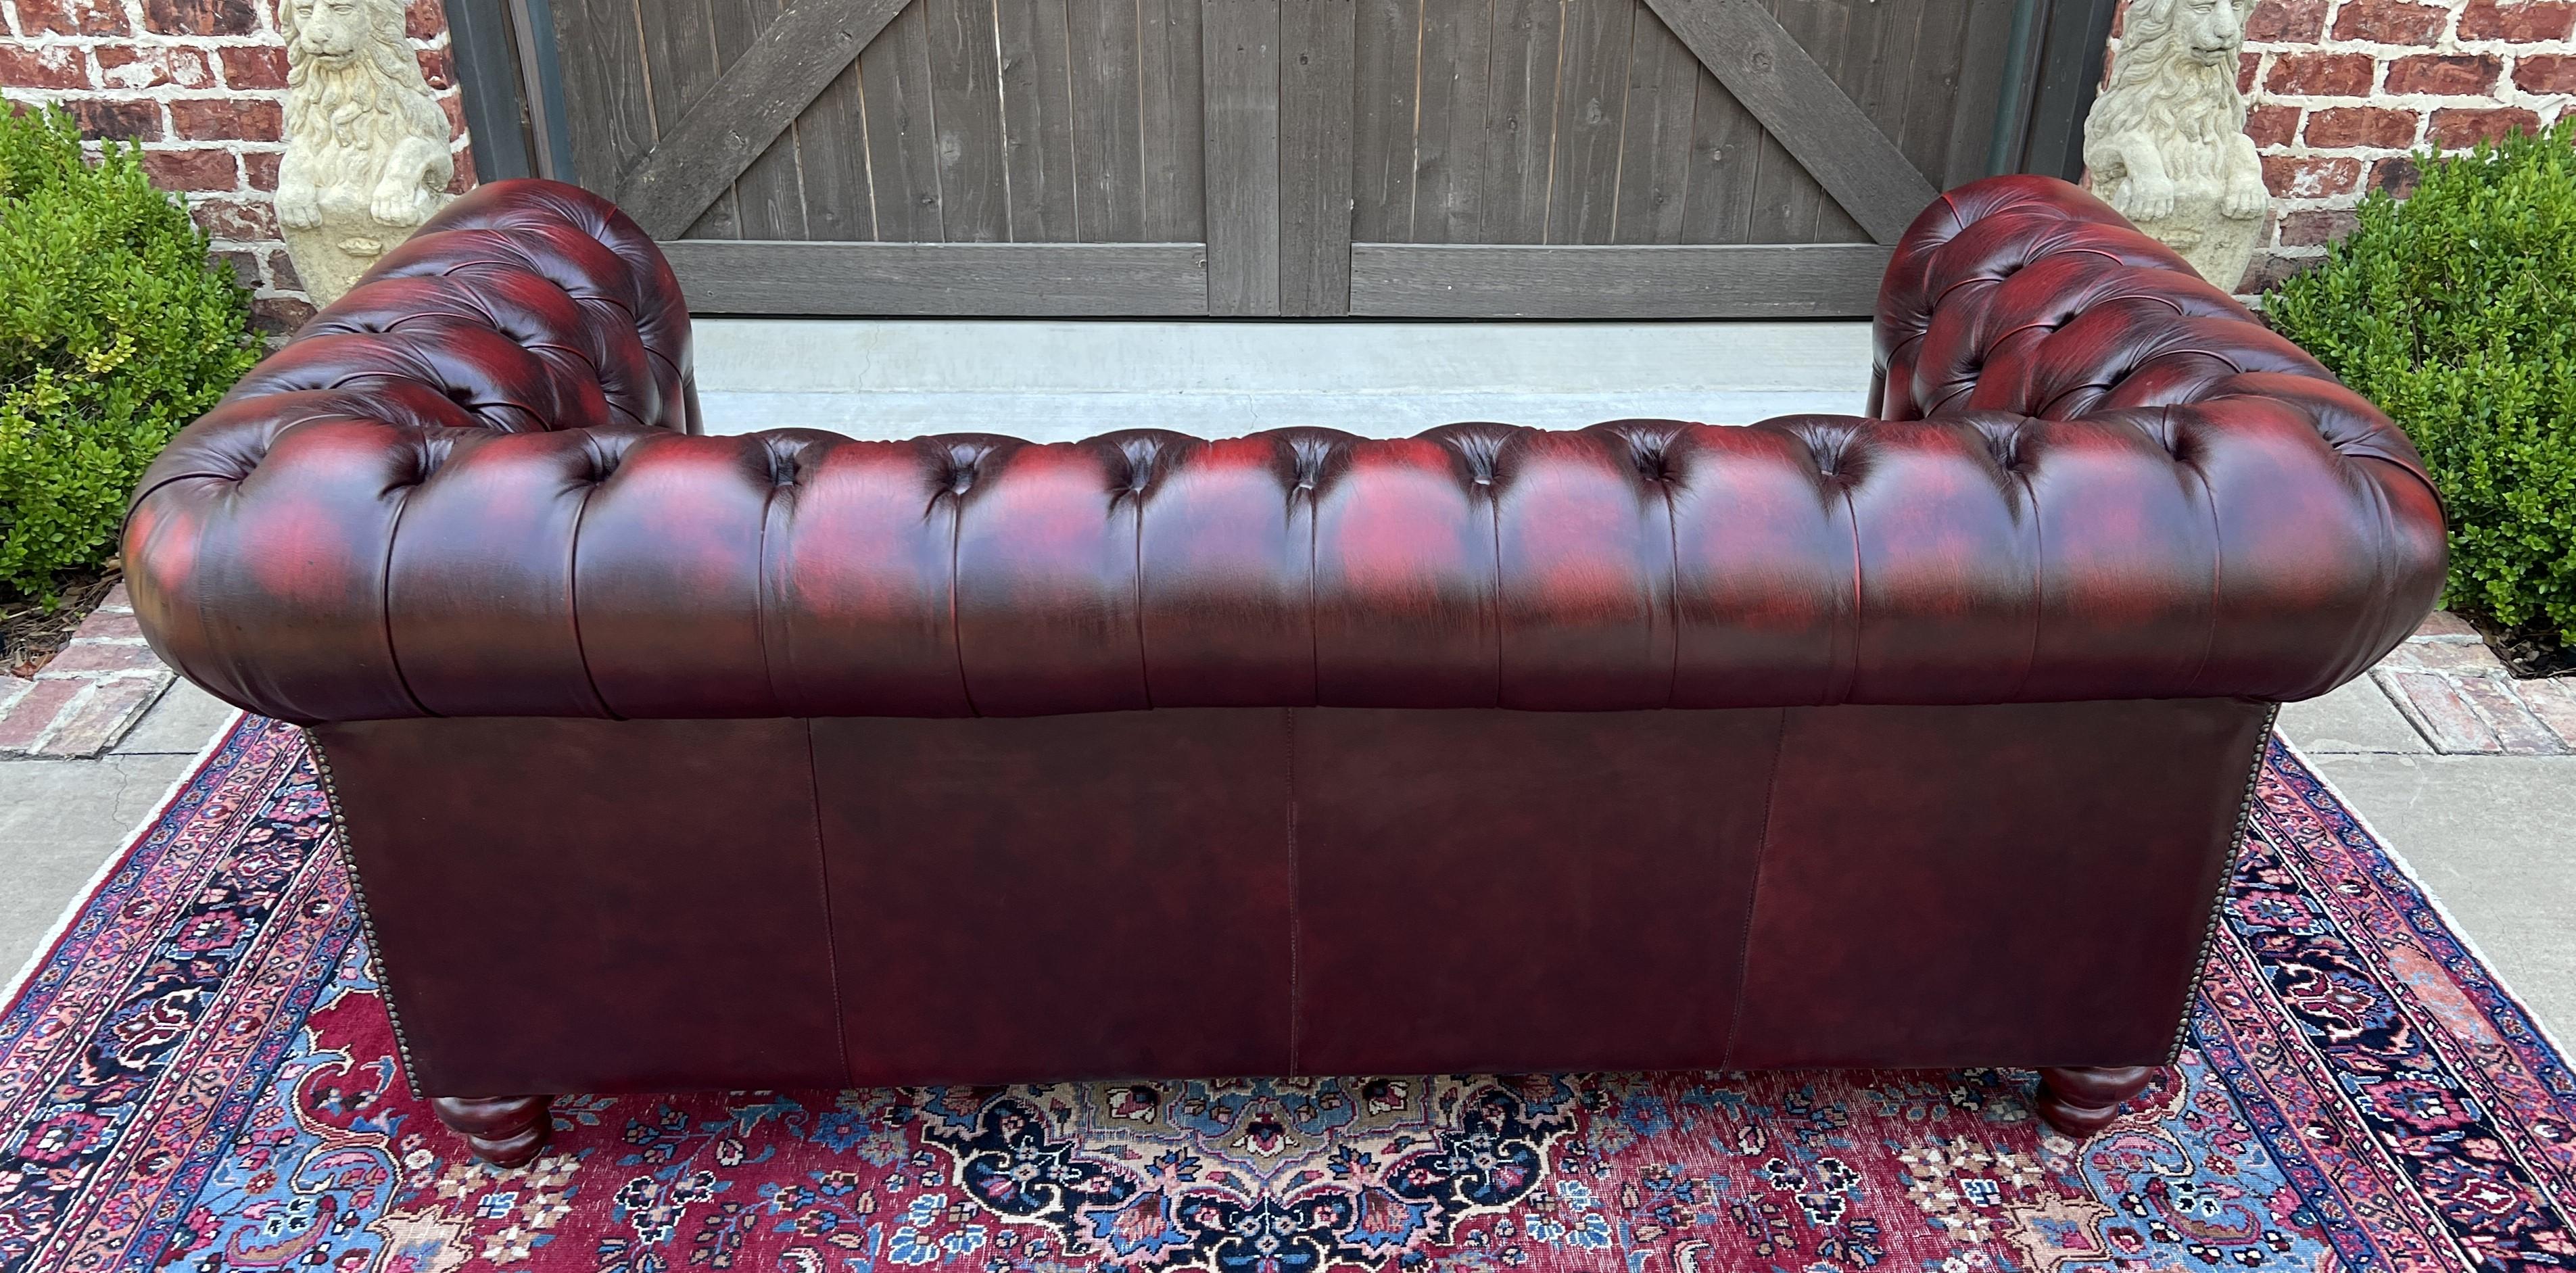 Vintage English Chesterfield Leather Sofa Tufted Seat Oxblood Red Mid-Century #2 13